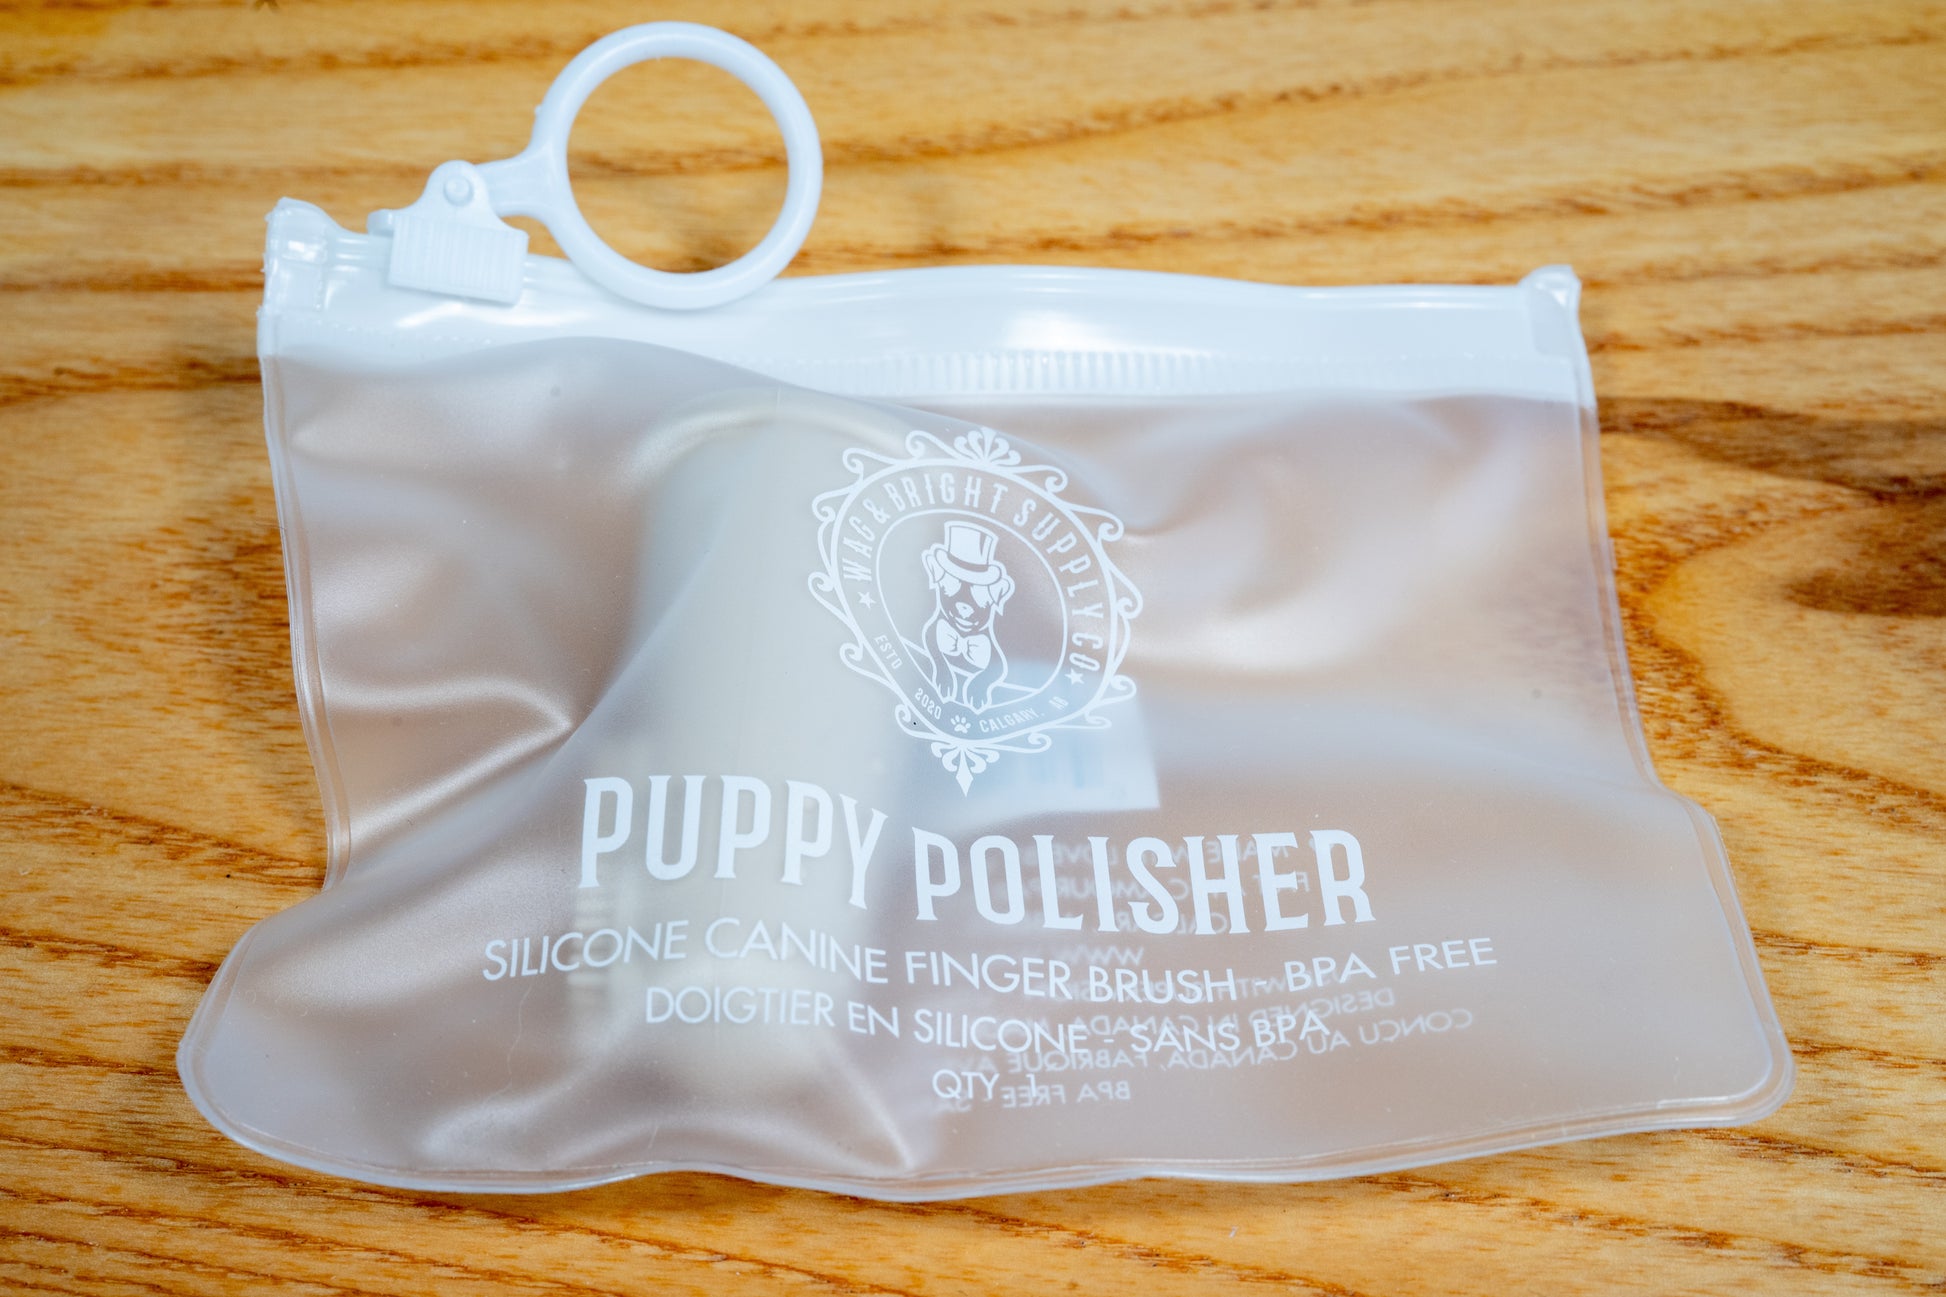 Silicone canine finger brush in its travel bag. | Doigtier en silicone pour soin buccale canin dans son sac de voyage..